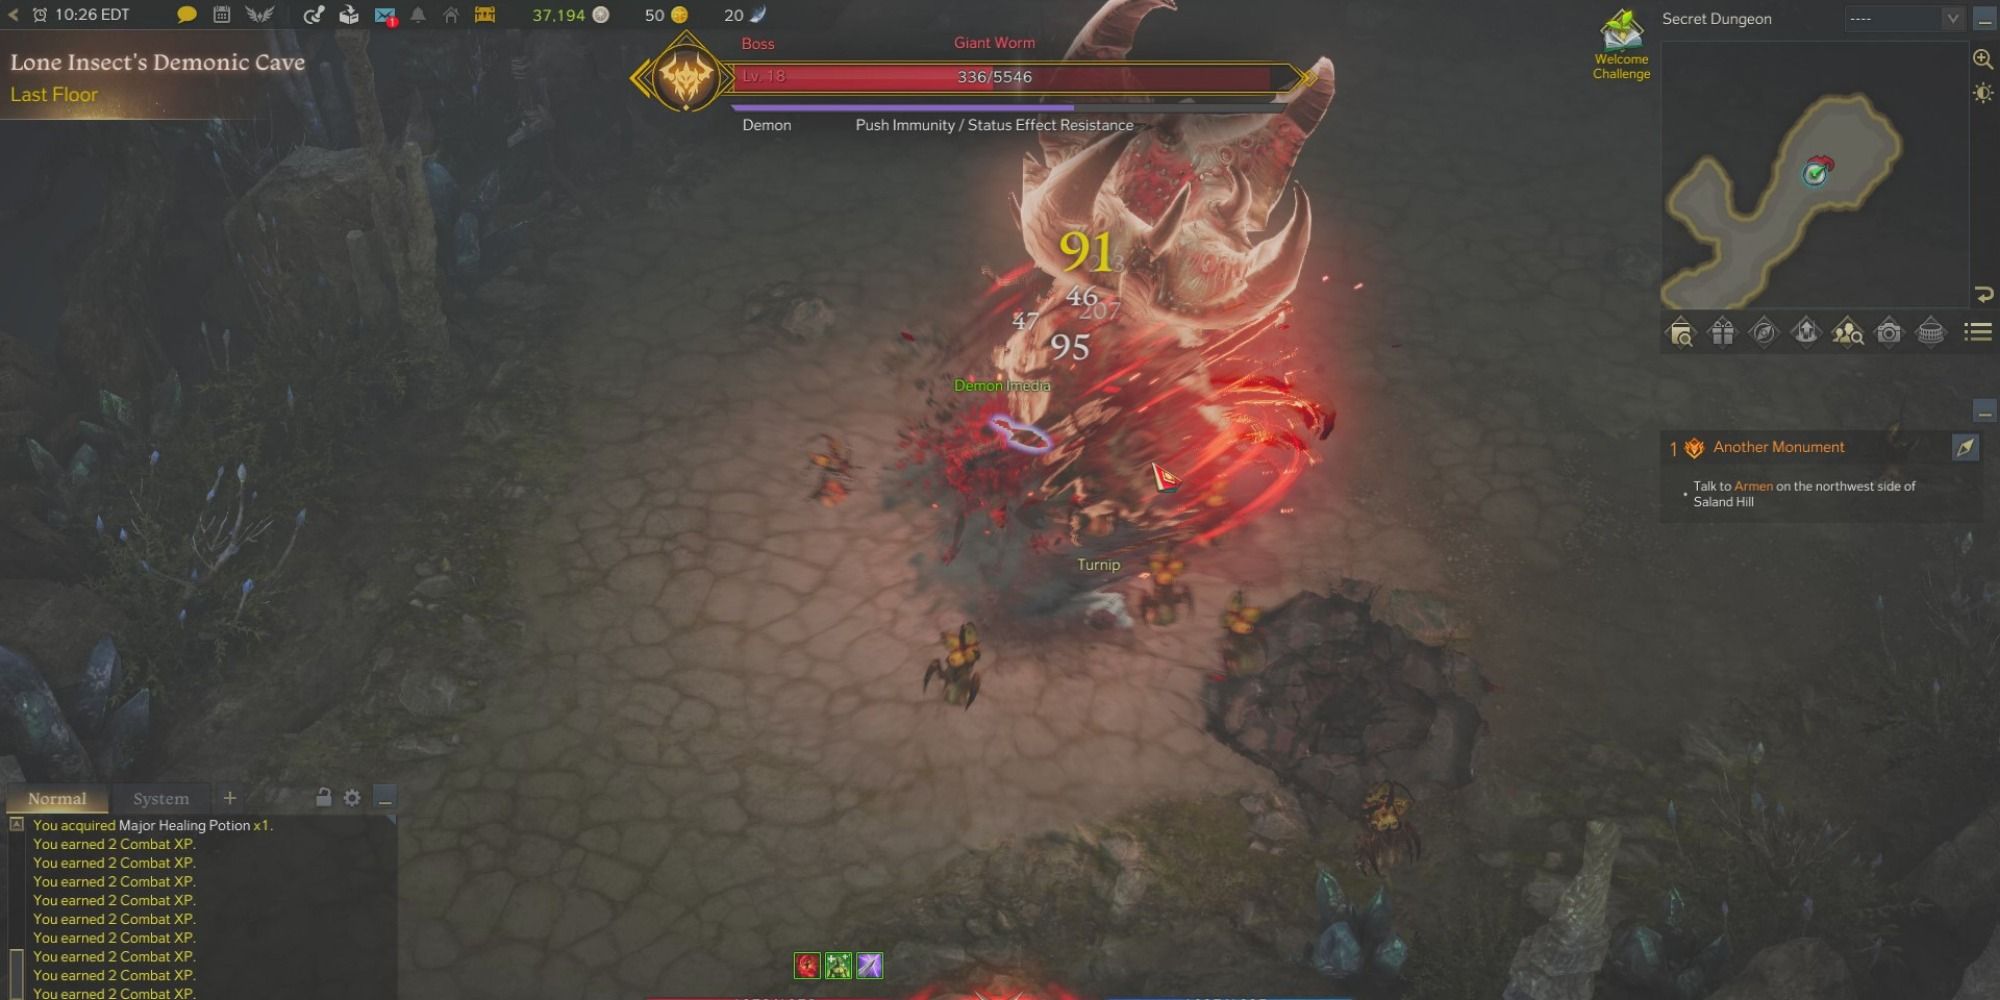 Assassin uses identity skill on a giant worm in a dungeon